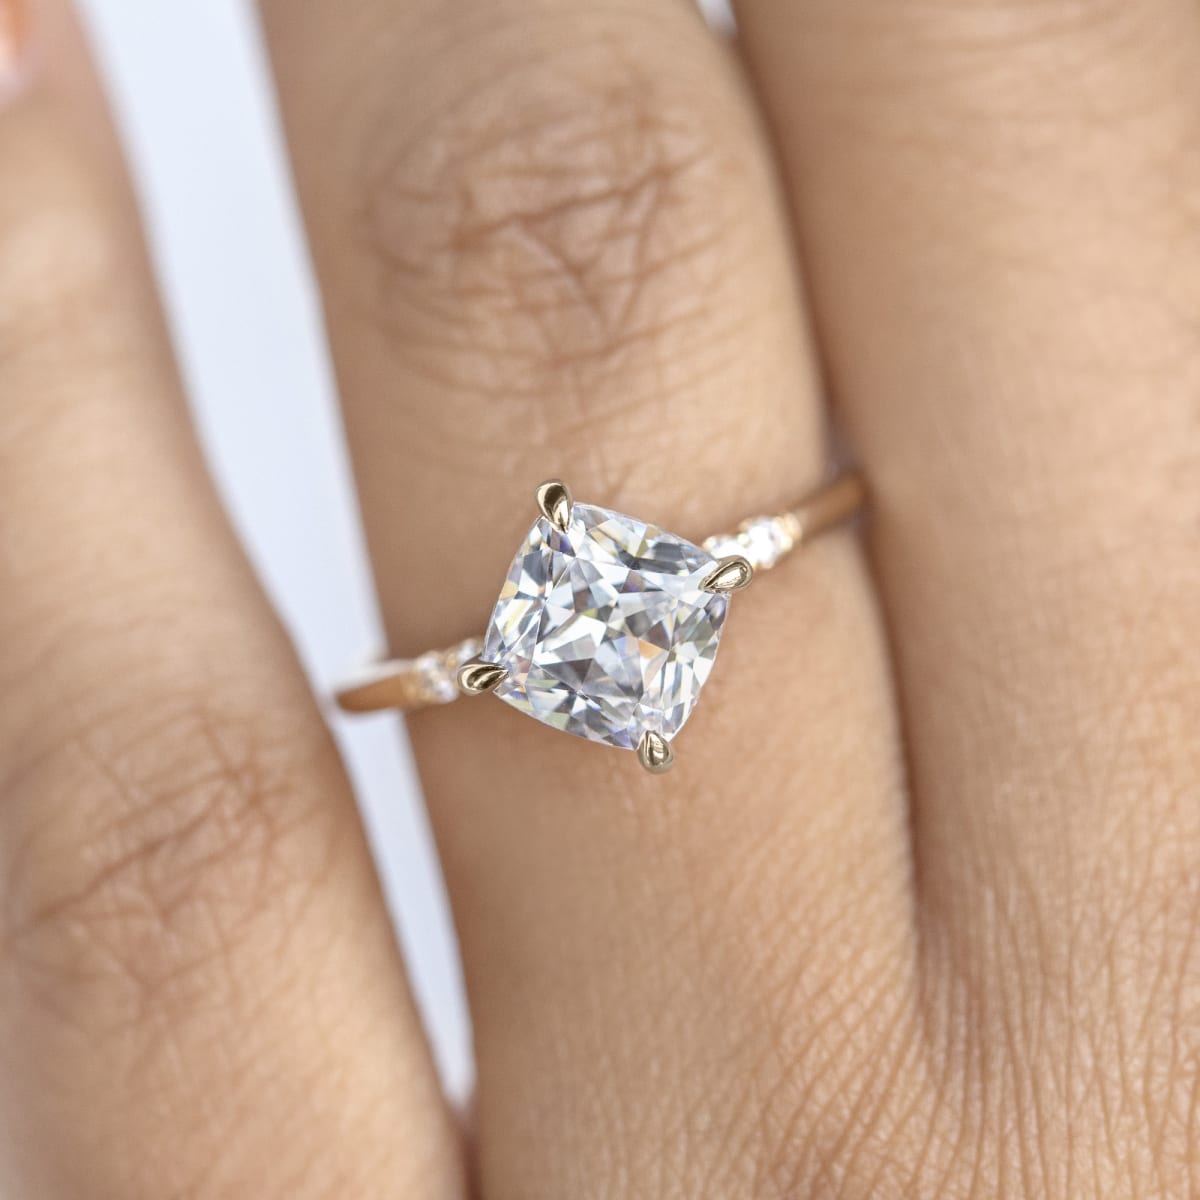 The Kite Set Asscher Solitaire Engagement Ring by Frank Darling